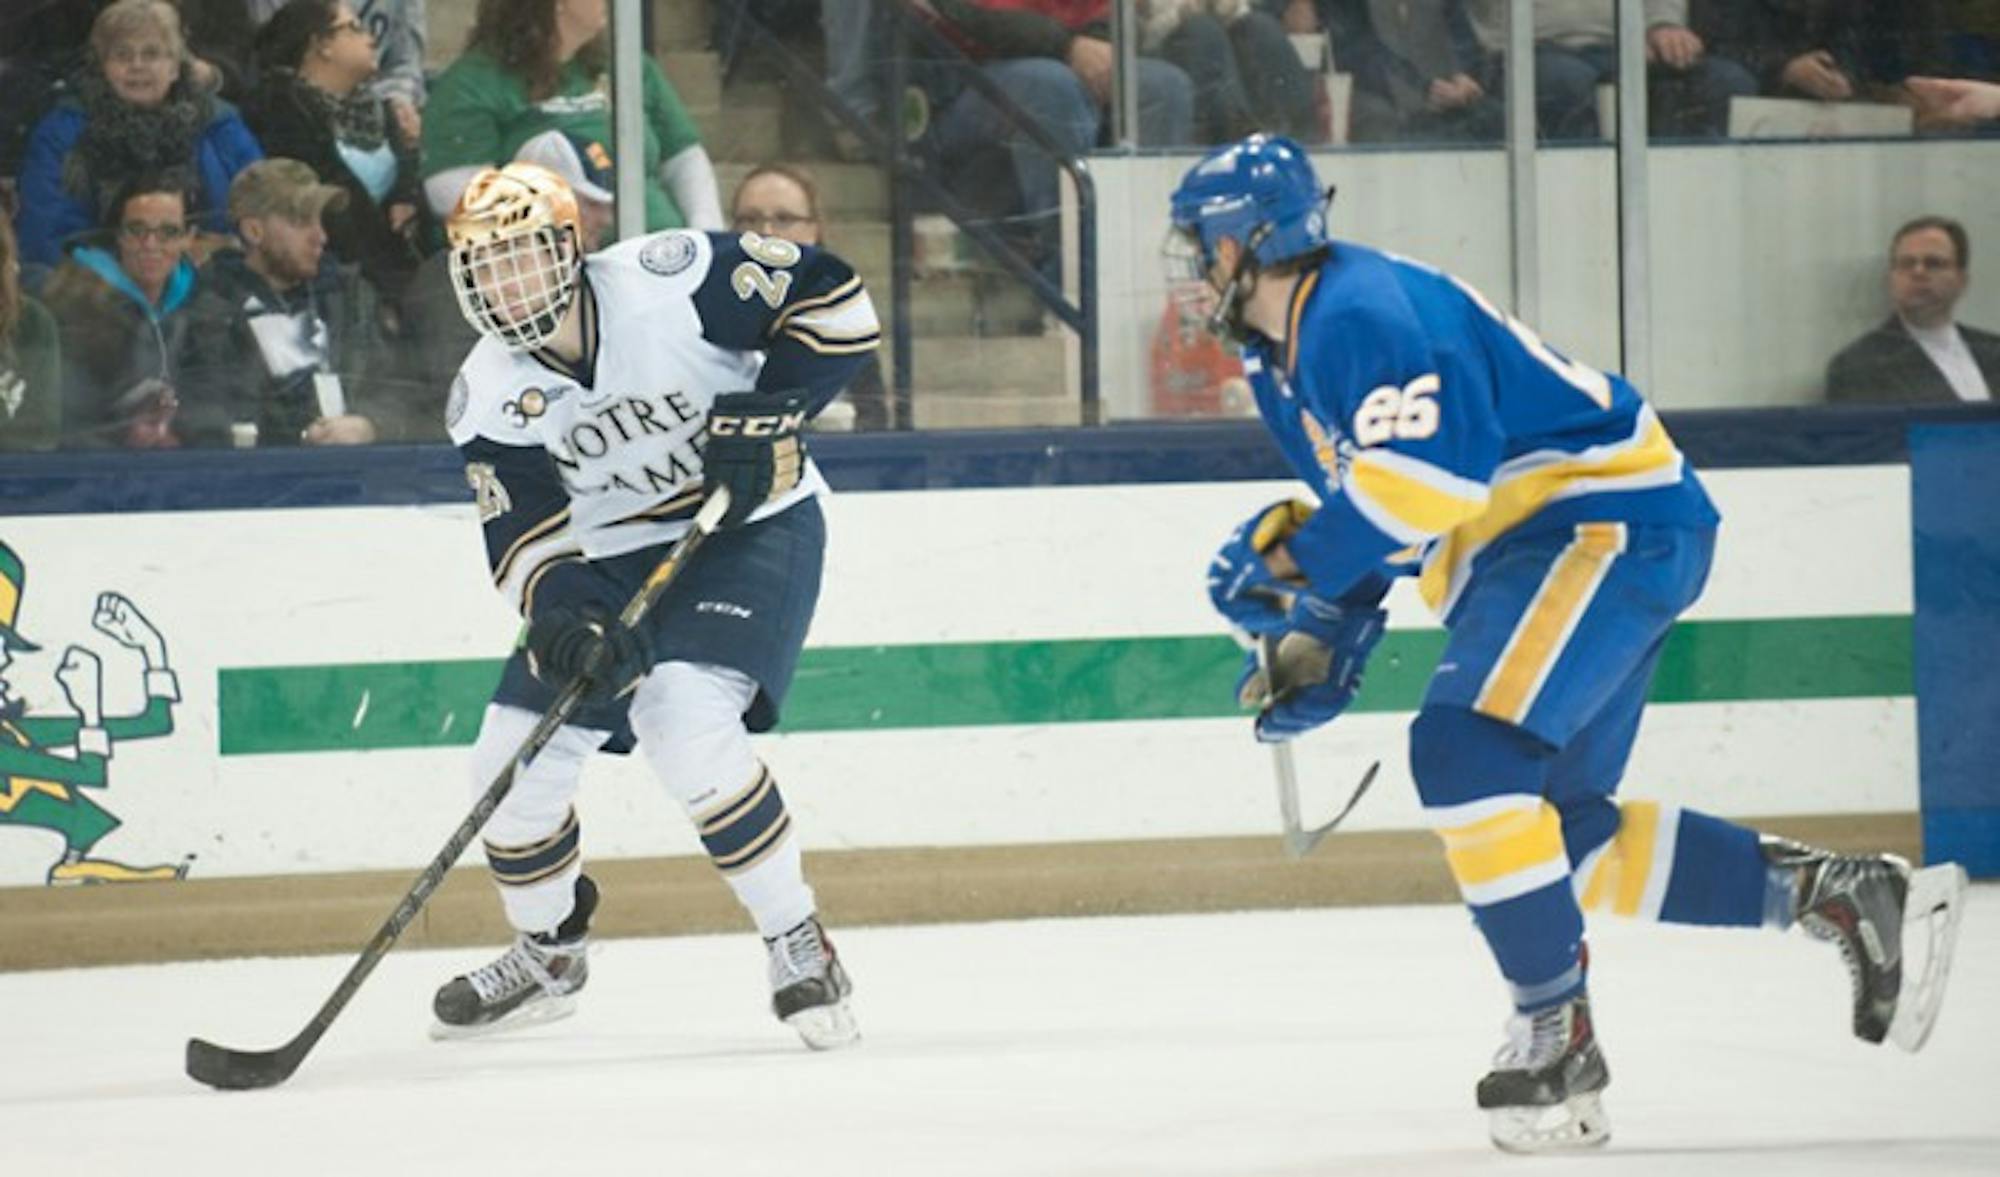 Steven Fogarty pushes the puck ahead against Lake Superior State on Saturday, a 4-2 Irish win. Fogarty scored two goals in the game.